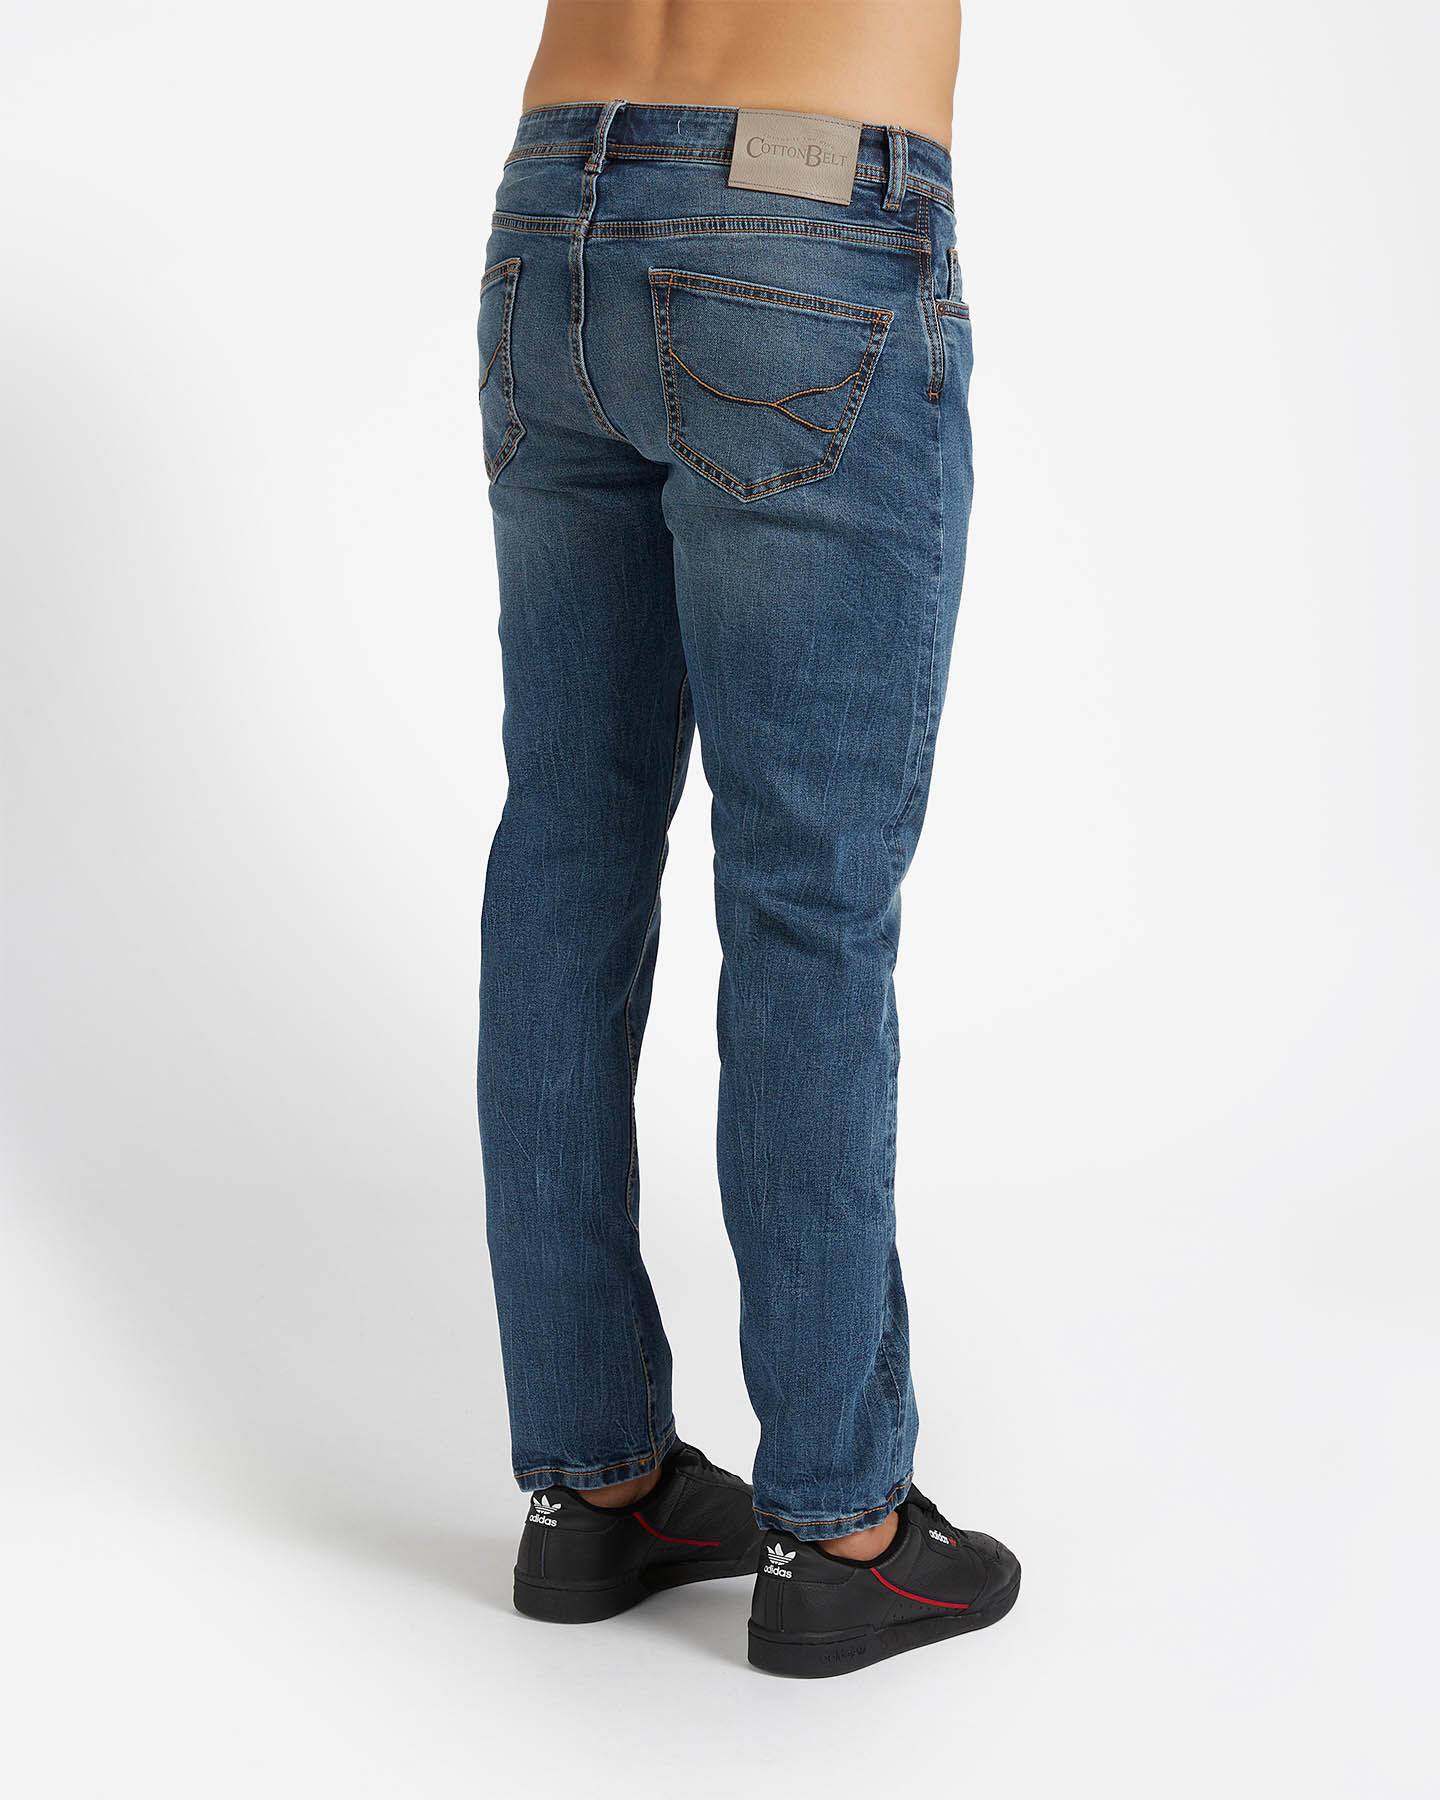  Jeans COTTON BELT 5TS MODERN M S4076653|MD|30 scatto 1